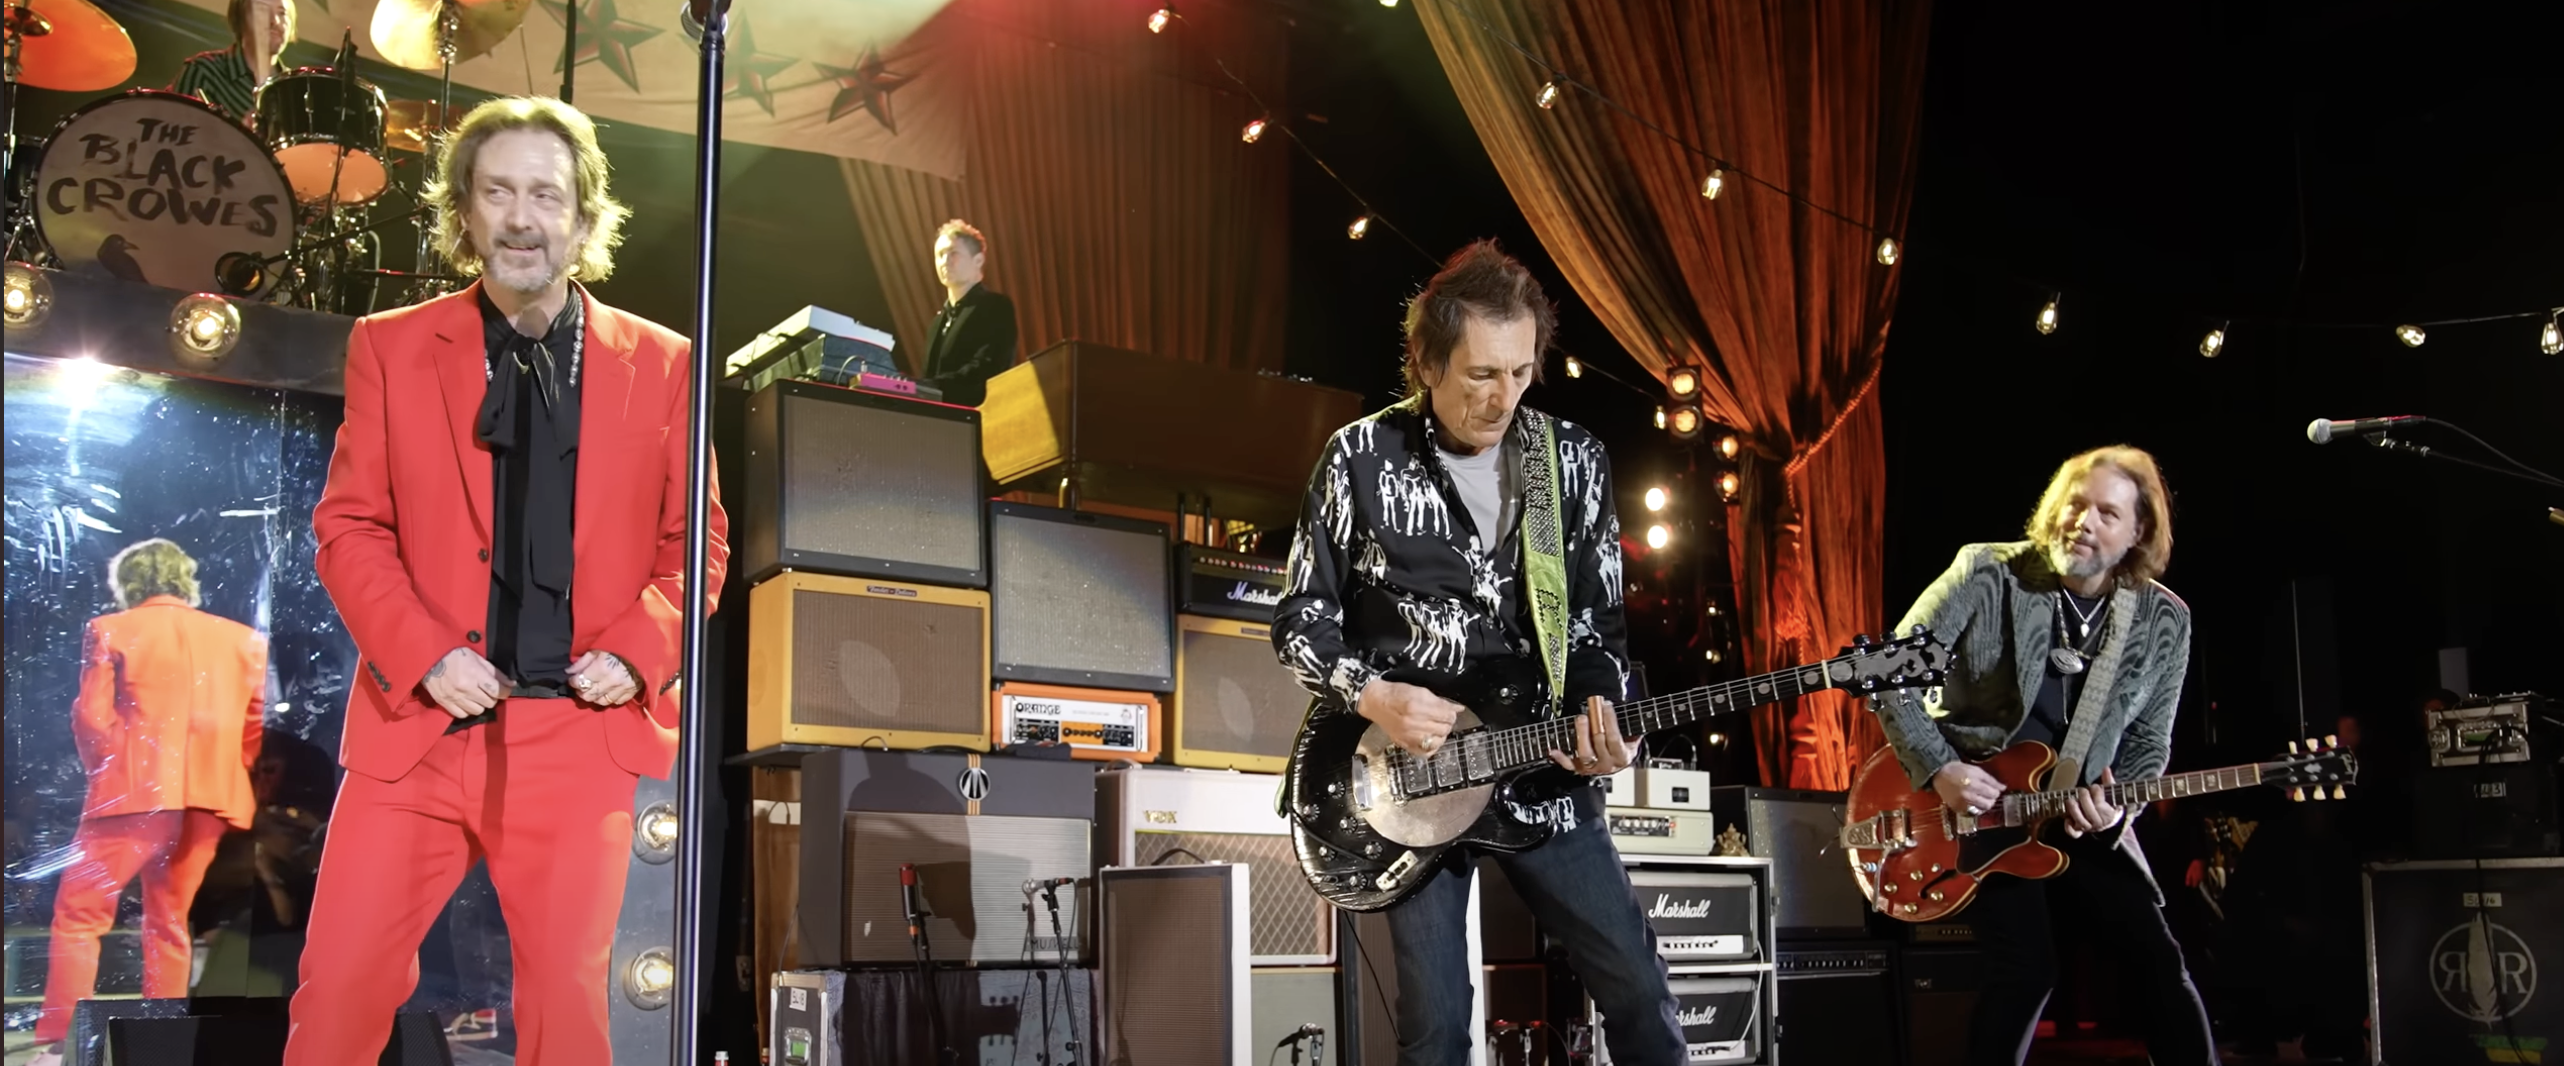 Watch Ronnie Wood join The Black Crowes on stage for “Stay With Me”